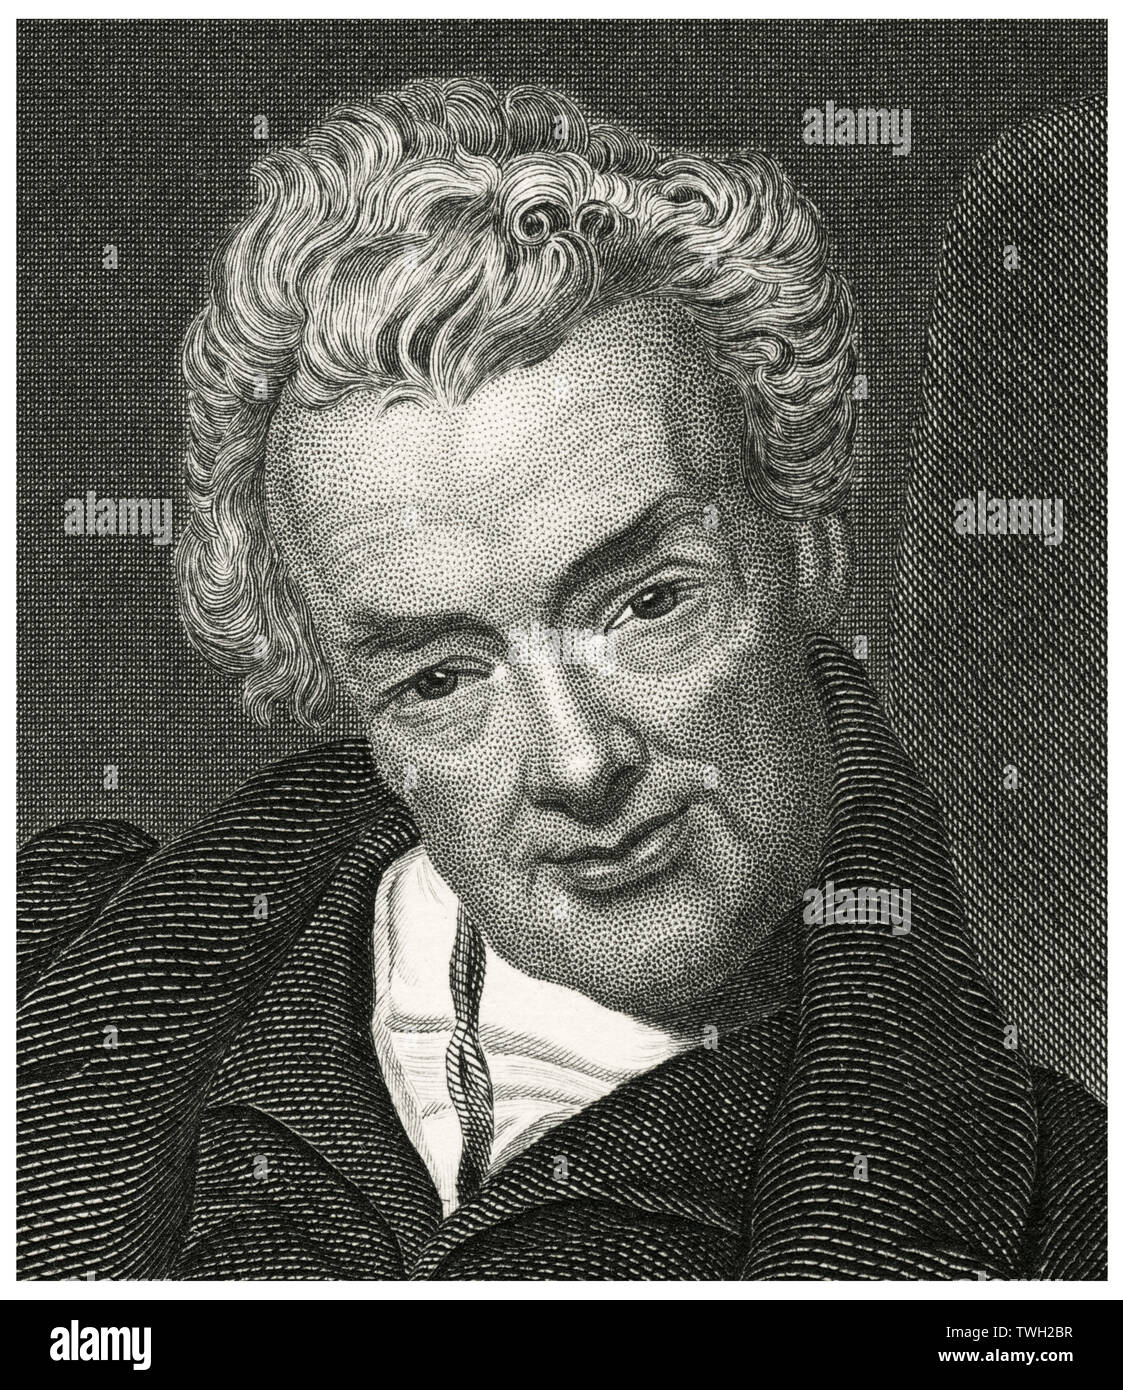 William Wilberforce (1759-1823), English Politician and Leader of the movement to stop the Slave Trade, Head and Shoulders Portrait, Steel Engraving, Portrait Gallery of Eminent Men and Women of Europe and America by Evert A. Duyckinck, Published by Henry J. Johnson, Johnson, Wilson & Company, New York, 1873 Stock Photo